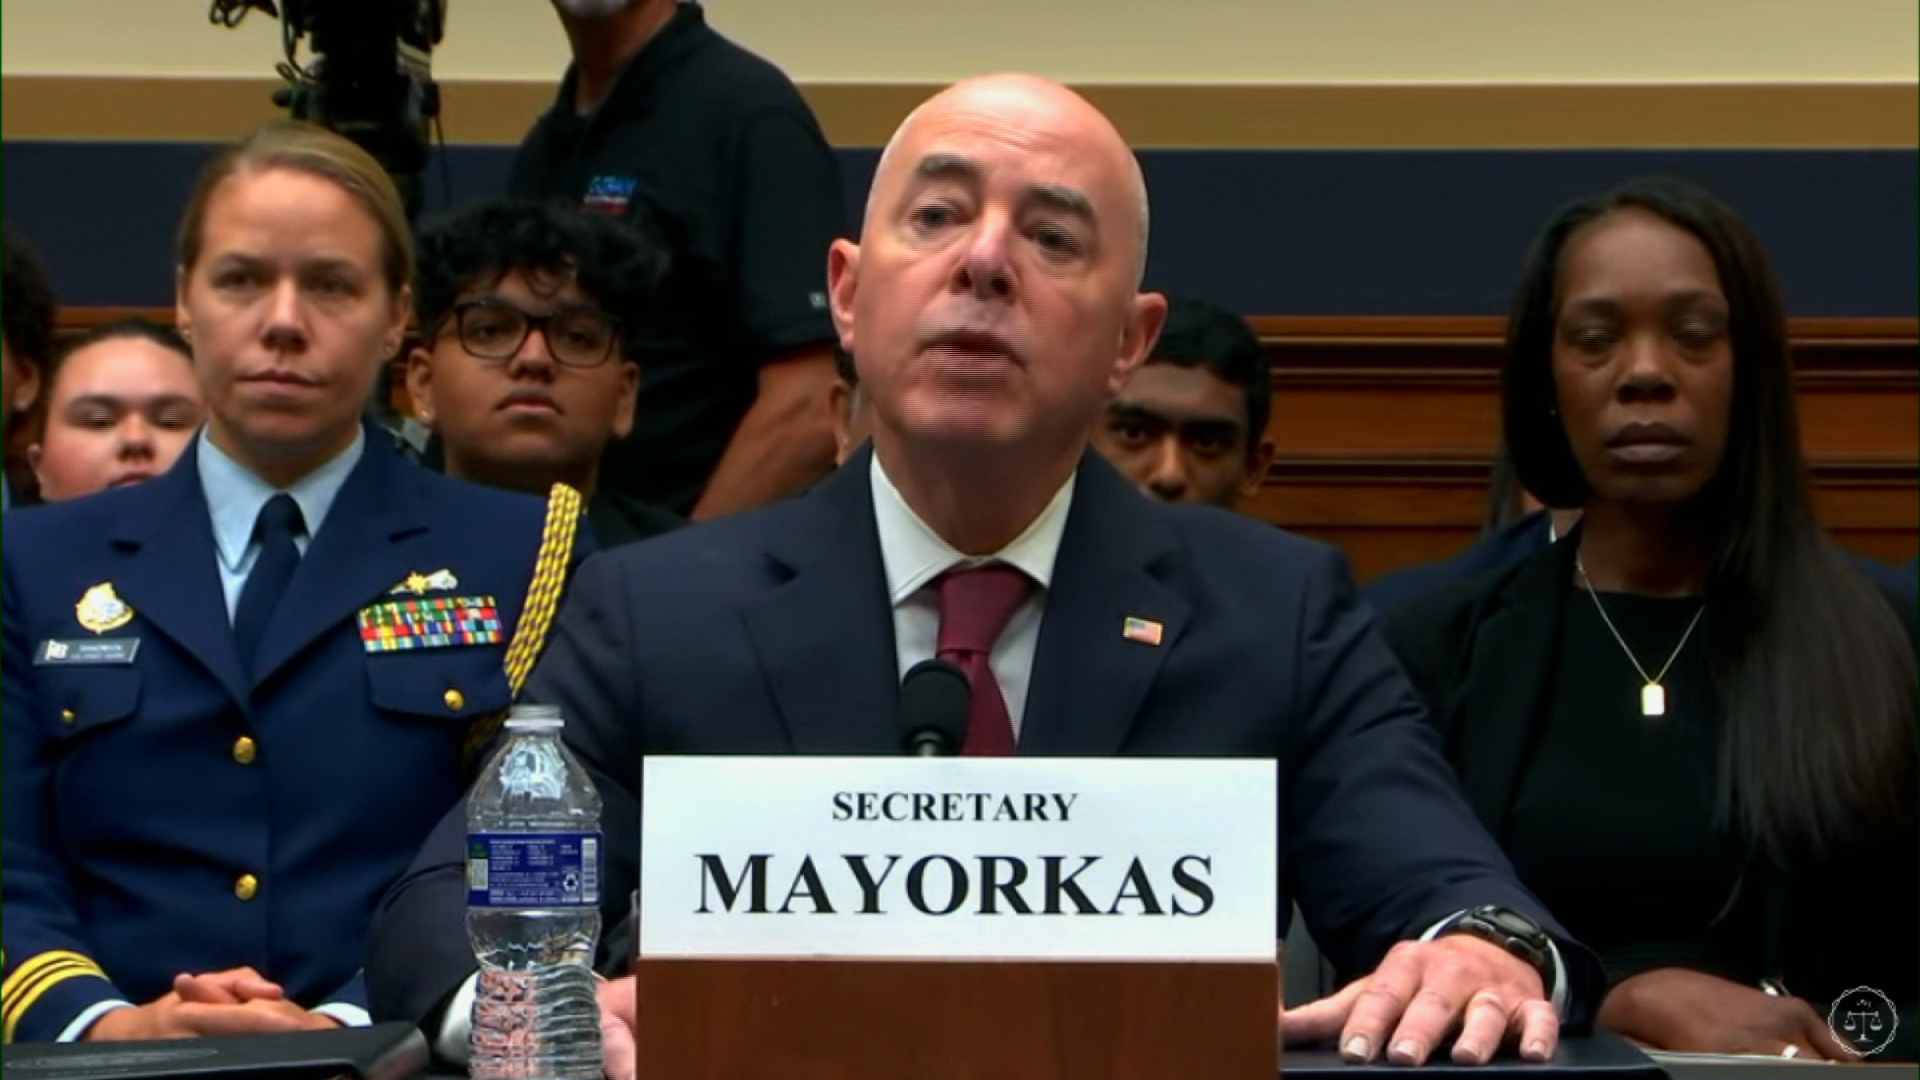 Dhs Approach To Immigration Is Working Despite Broken System Mayorkas Says 